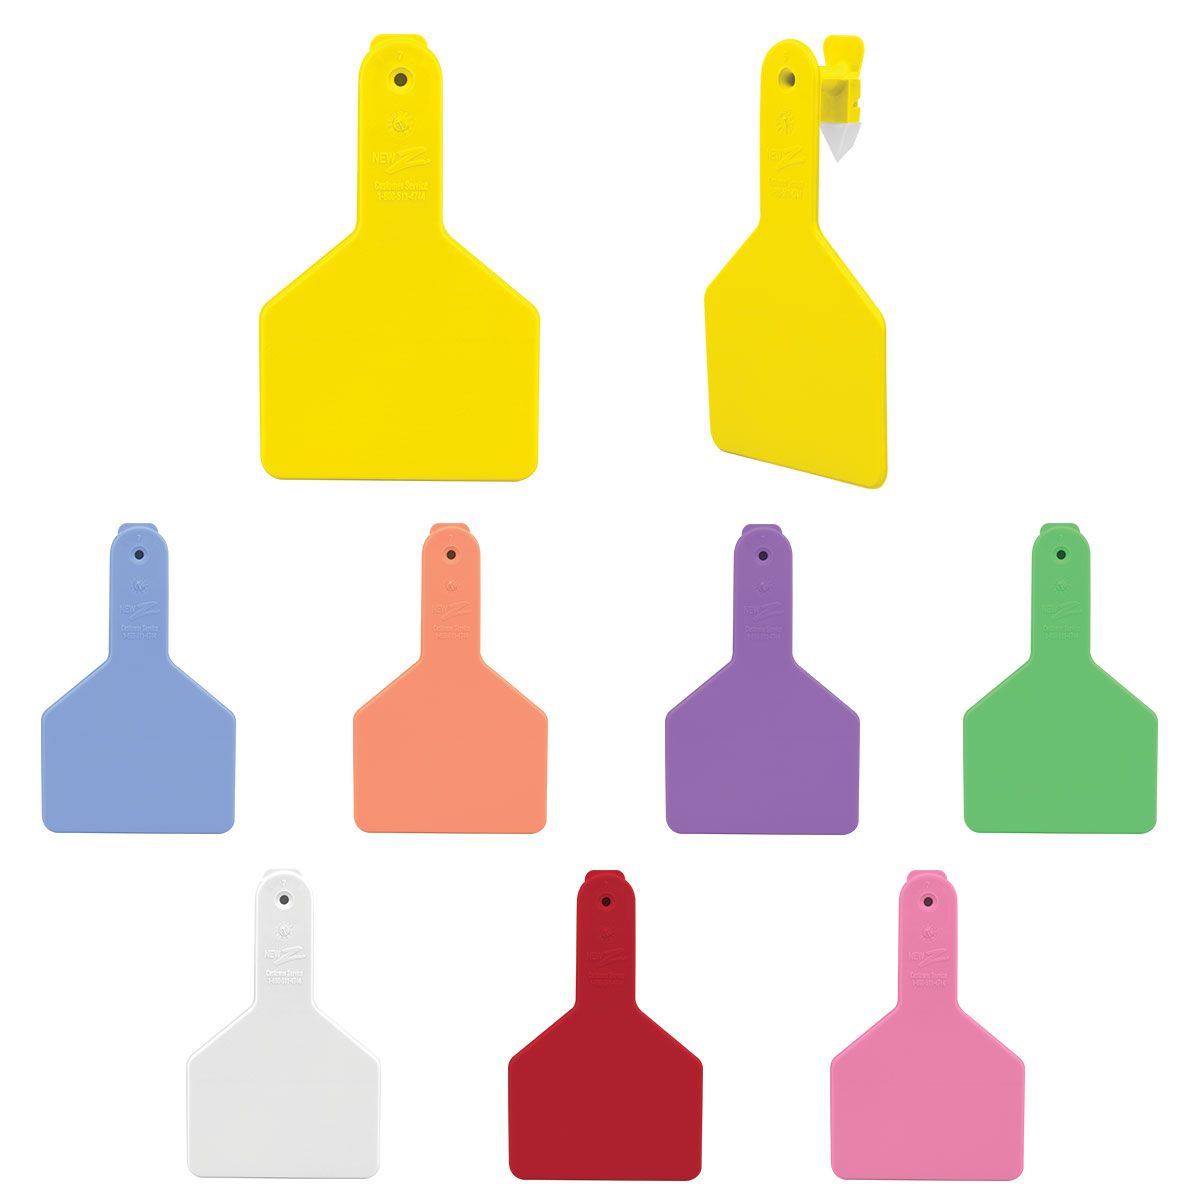 Z-TAG CALF TAG ONE PIECE 2-3/8" W x 3-3/4" H Blank Long Neck YELLOW 25 Count 